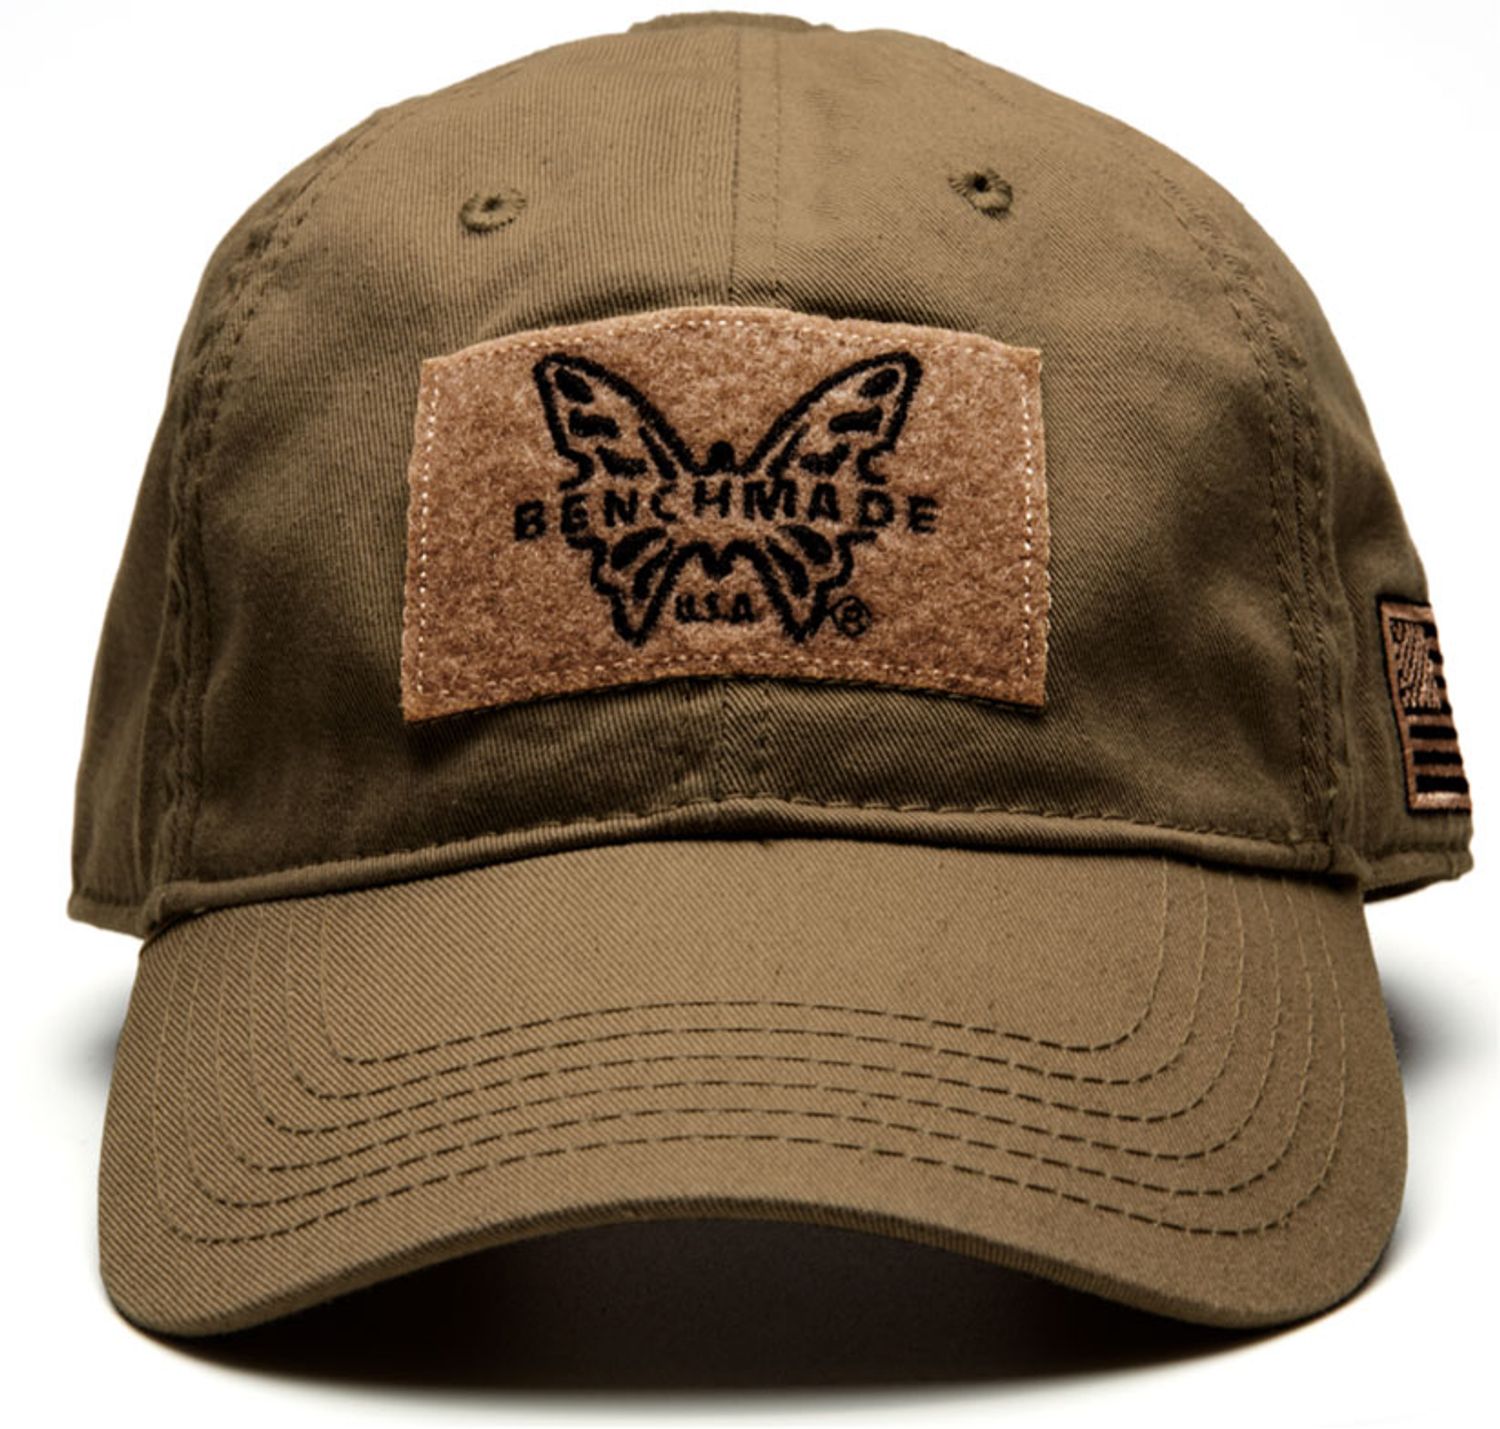 The Top 10 Tactical Hats Reviewed